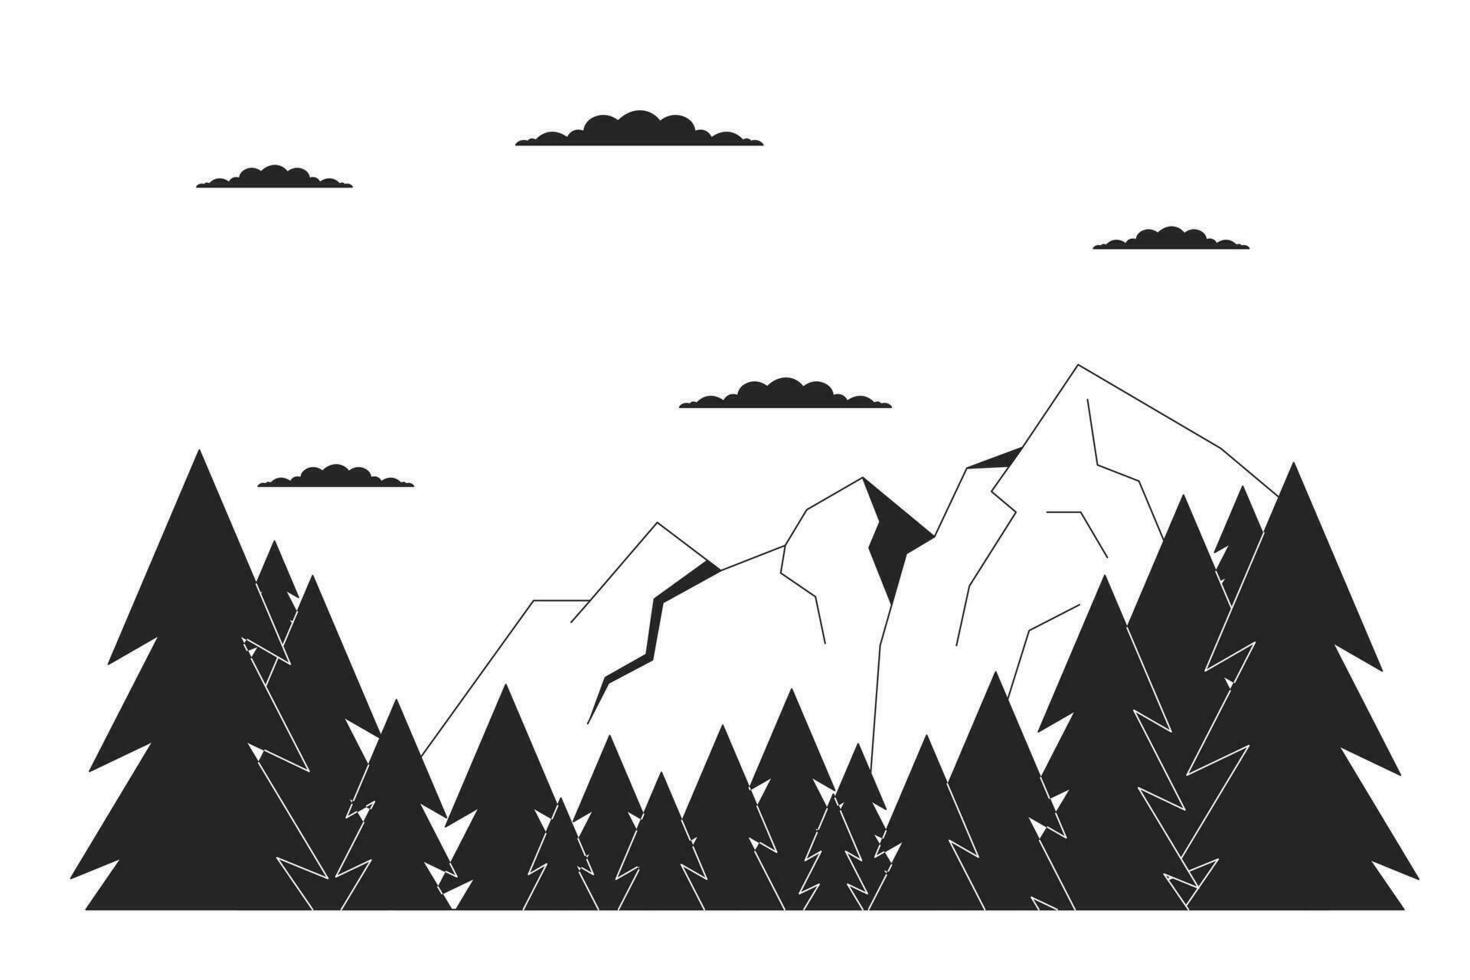 Scenery mountain range pine trees black and white cartoon flat illustration. Ski resort summit 2D lineart landscape isolated. Clouds above mountains springtime monochrome scene vector outline image